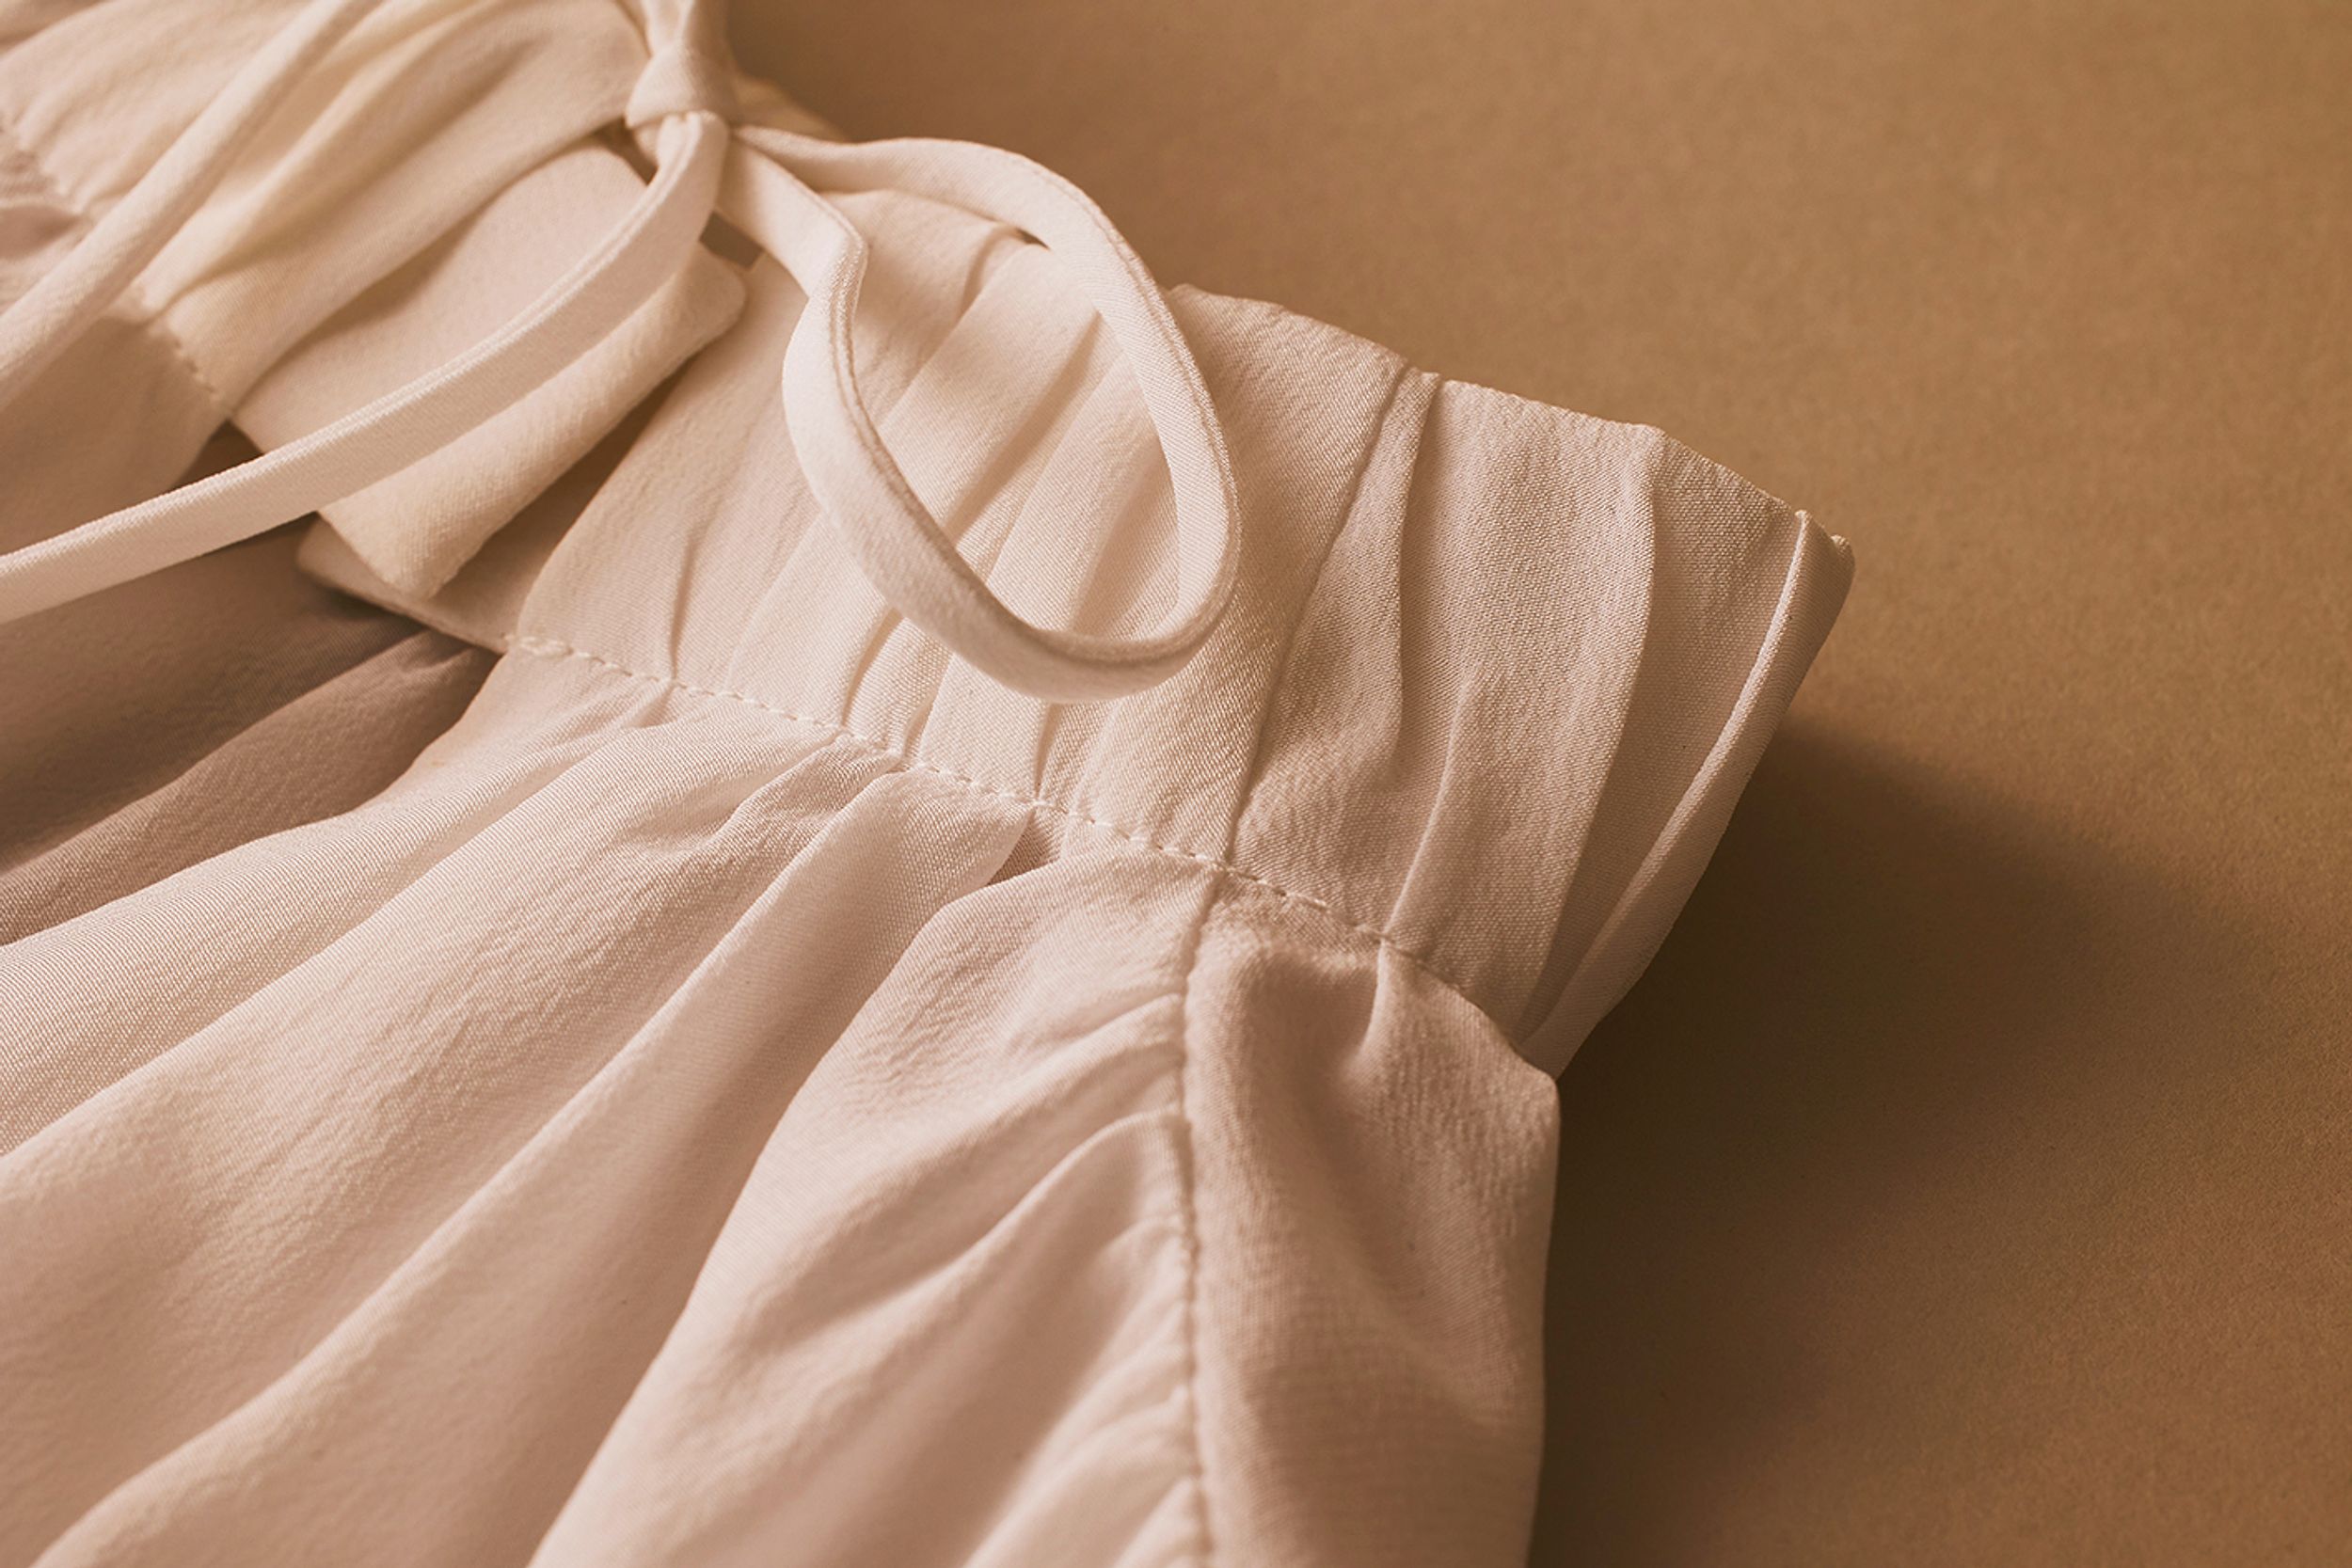 Scanlan Theodore silk blouse with close detailed view of silk fabrication and collar.